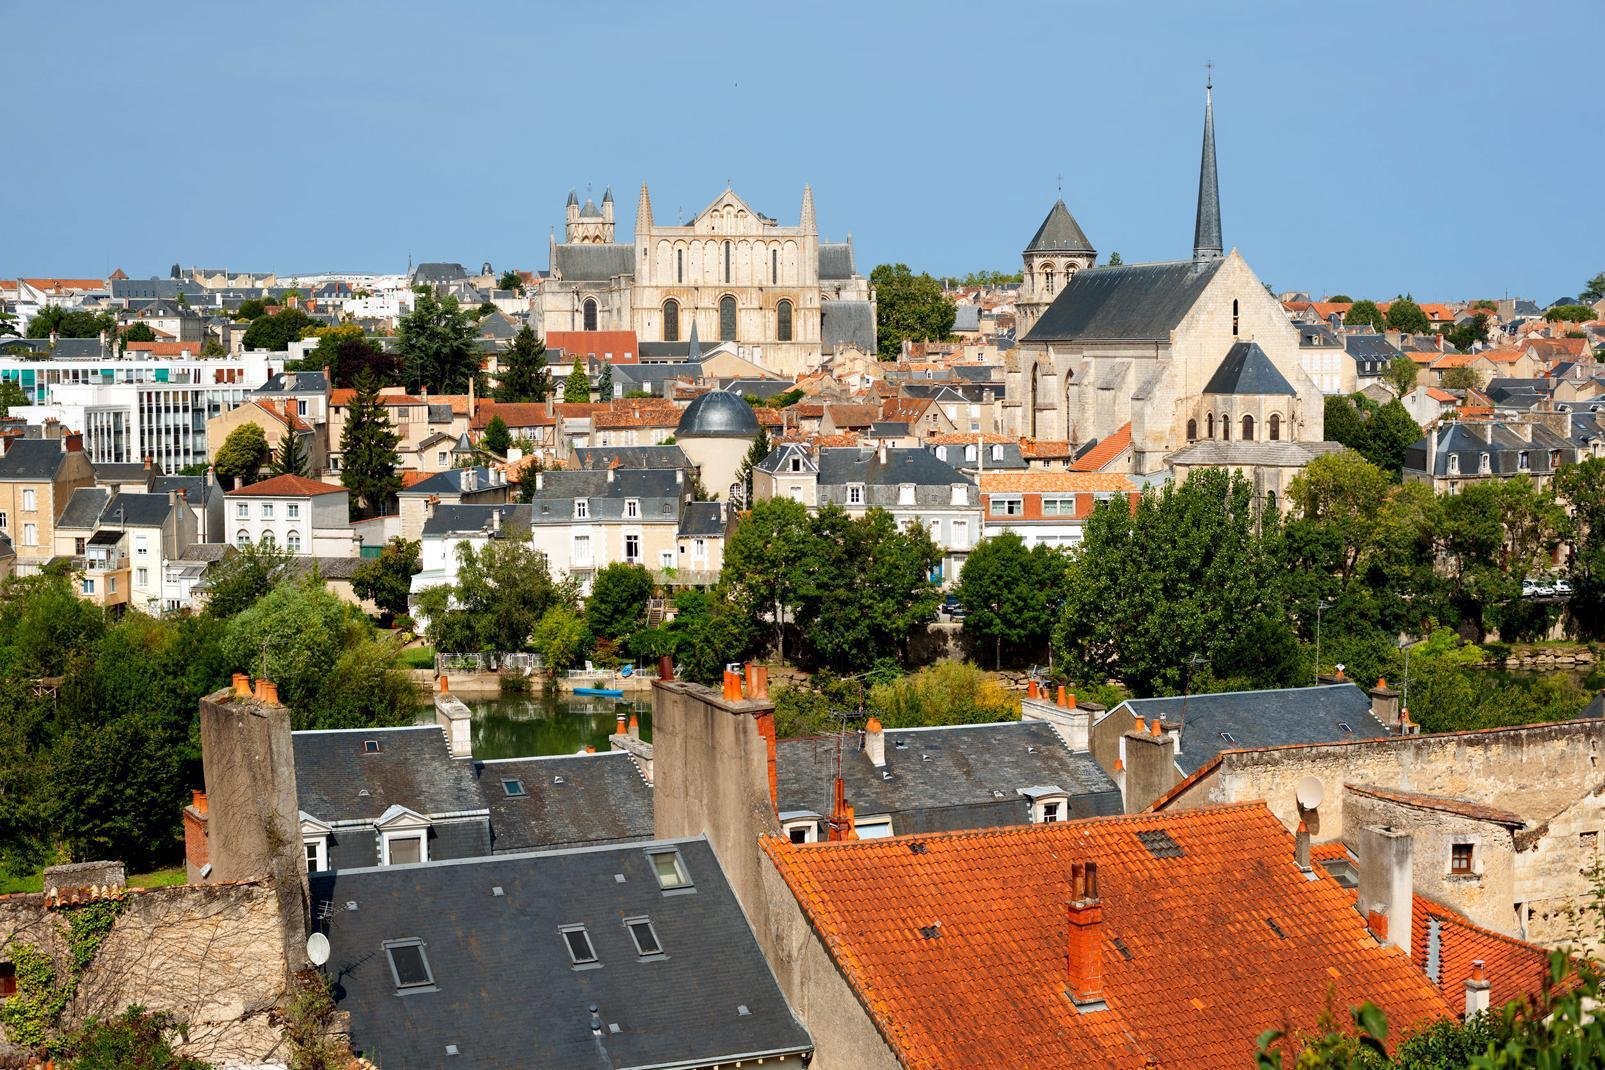 The capital of the Poitou-Charentes region is mid-way between Paris and Bordeaux. The old settlement of 'Lemonum' was built on a promontory between the Clain and Boivre valleys.  
Known for the nearby Battle of Tours, at which Charles Martel halted the progress of the Muslims, the 'city of a hundred churches' has an exceptional architectural heritage in the form of 80 listed and protected monuments. ...